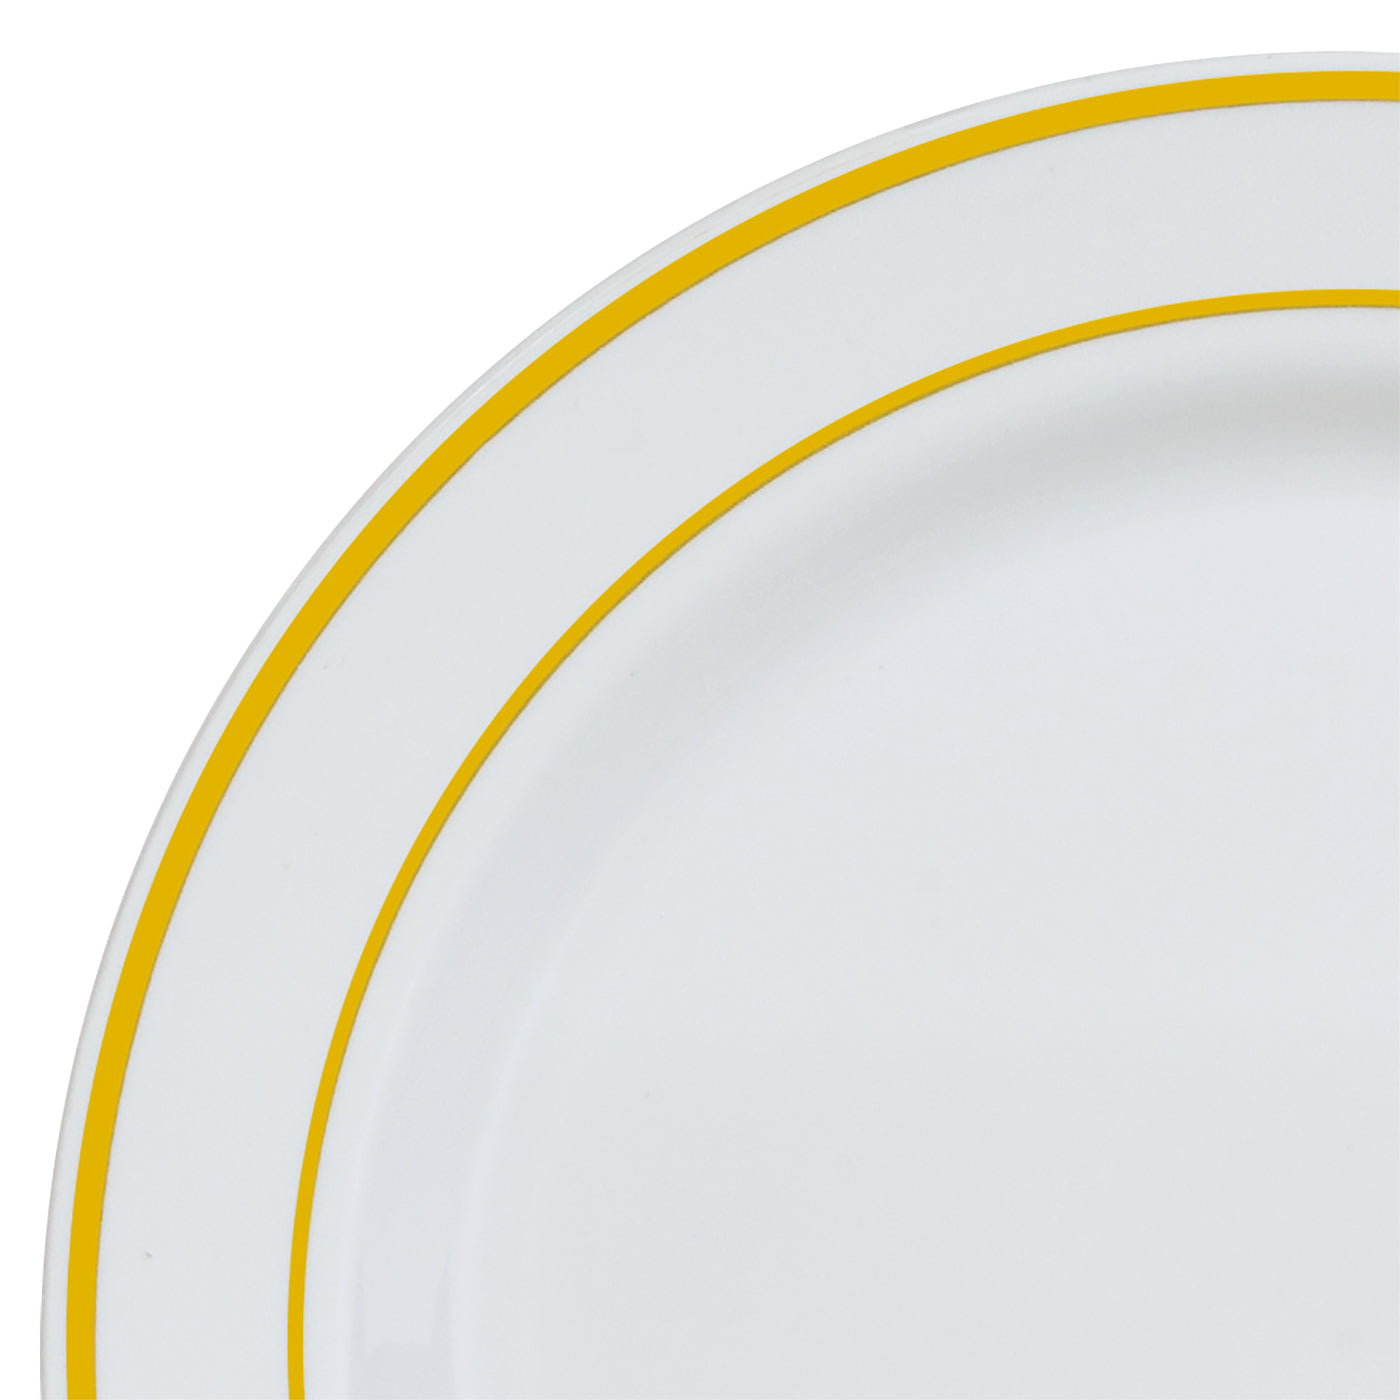 60 pc. White with Gold Rim Plastic Disposable Plates:  - 30 Dinner Plates and 30 Salad Plates